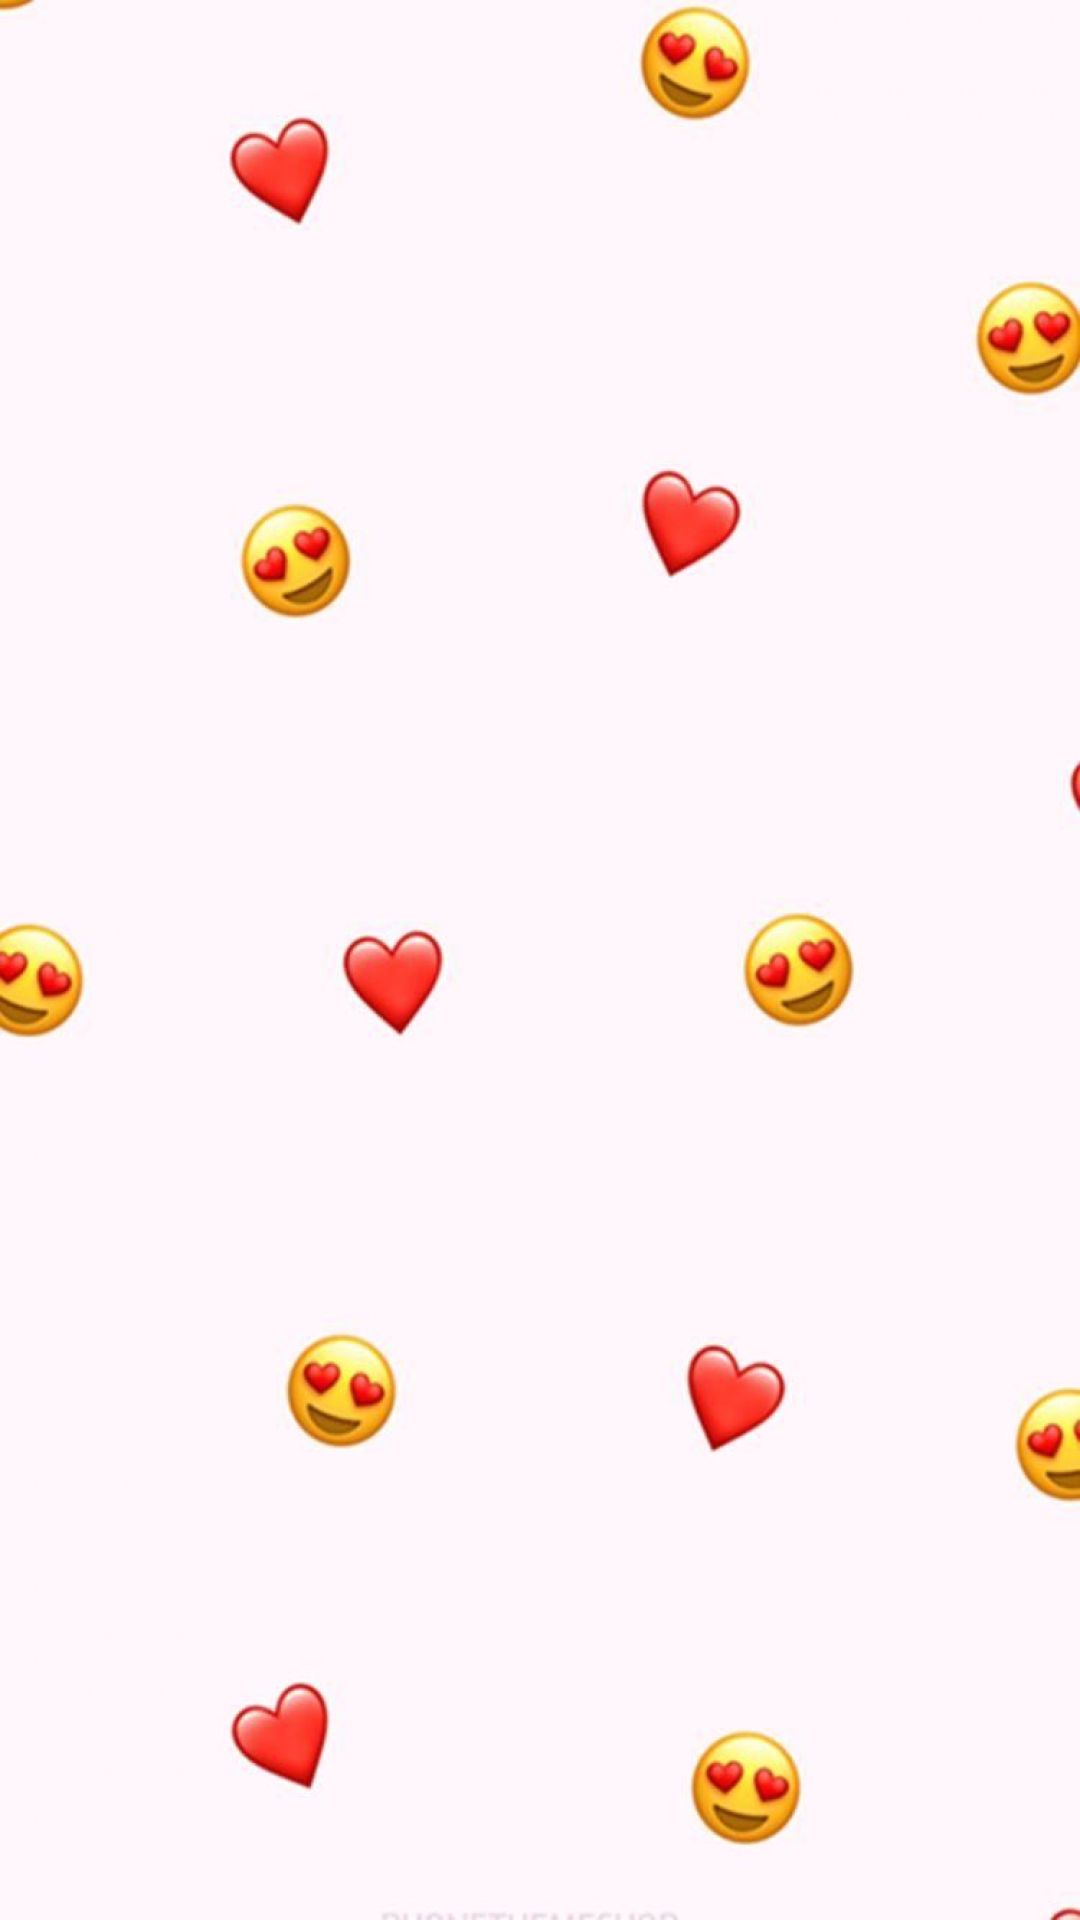 IPhone wallpaper of hearts and smileys for your phone. - Emoji